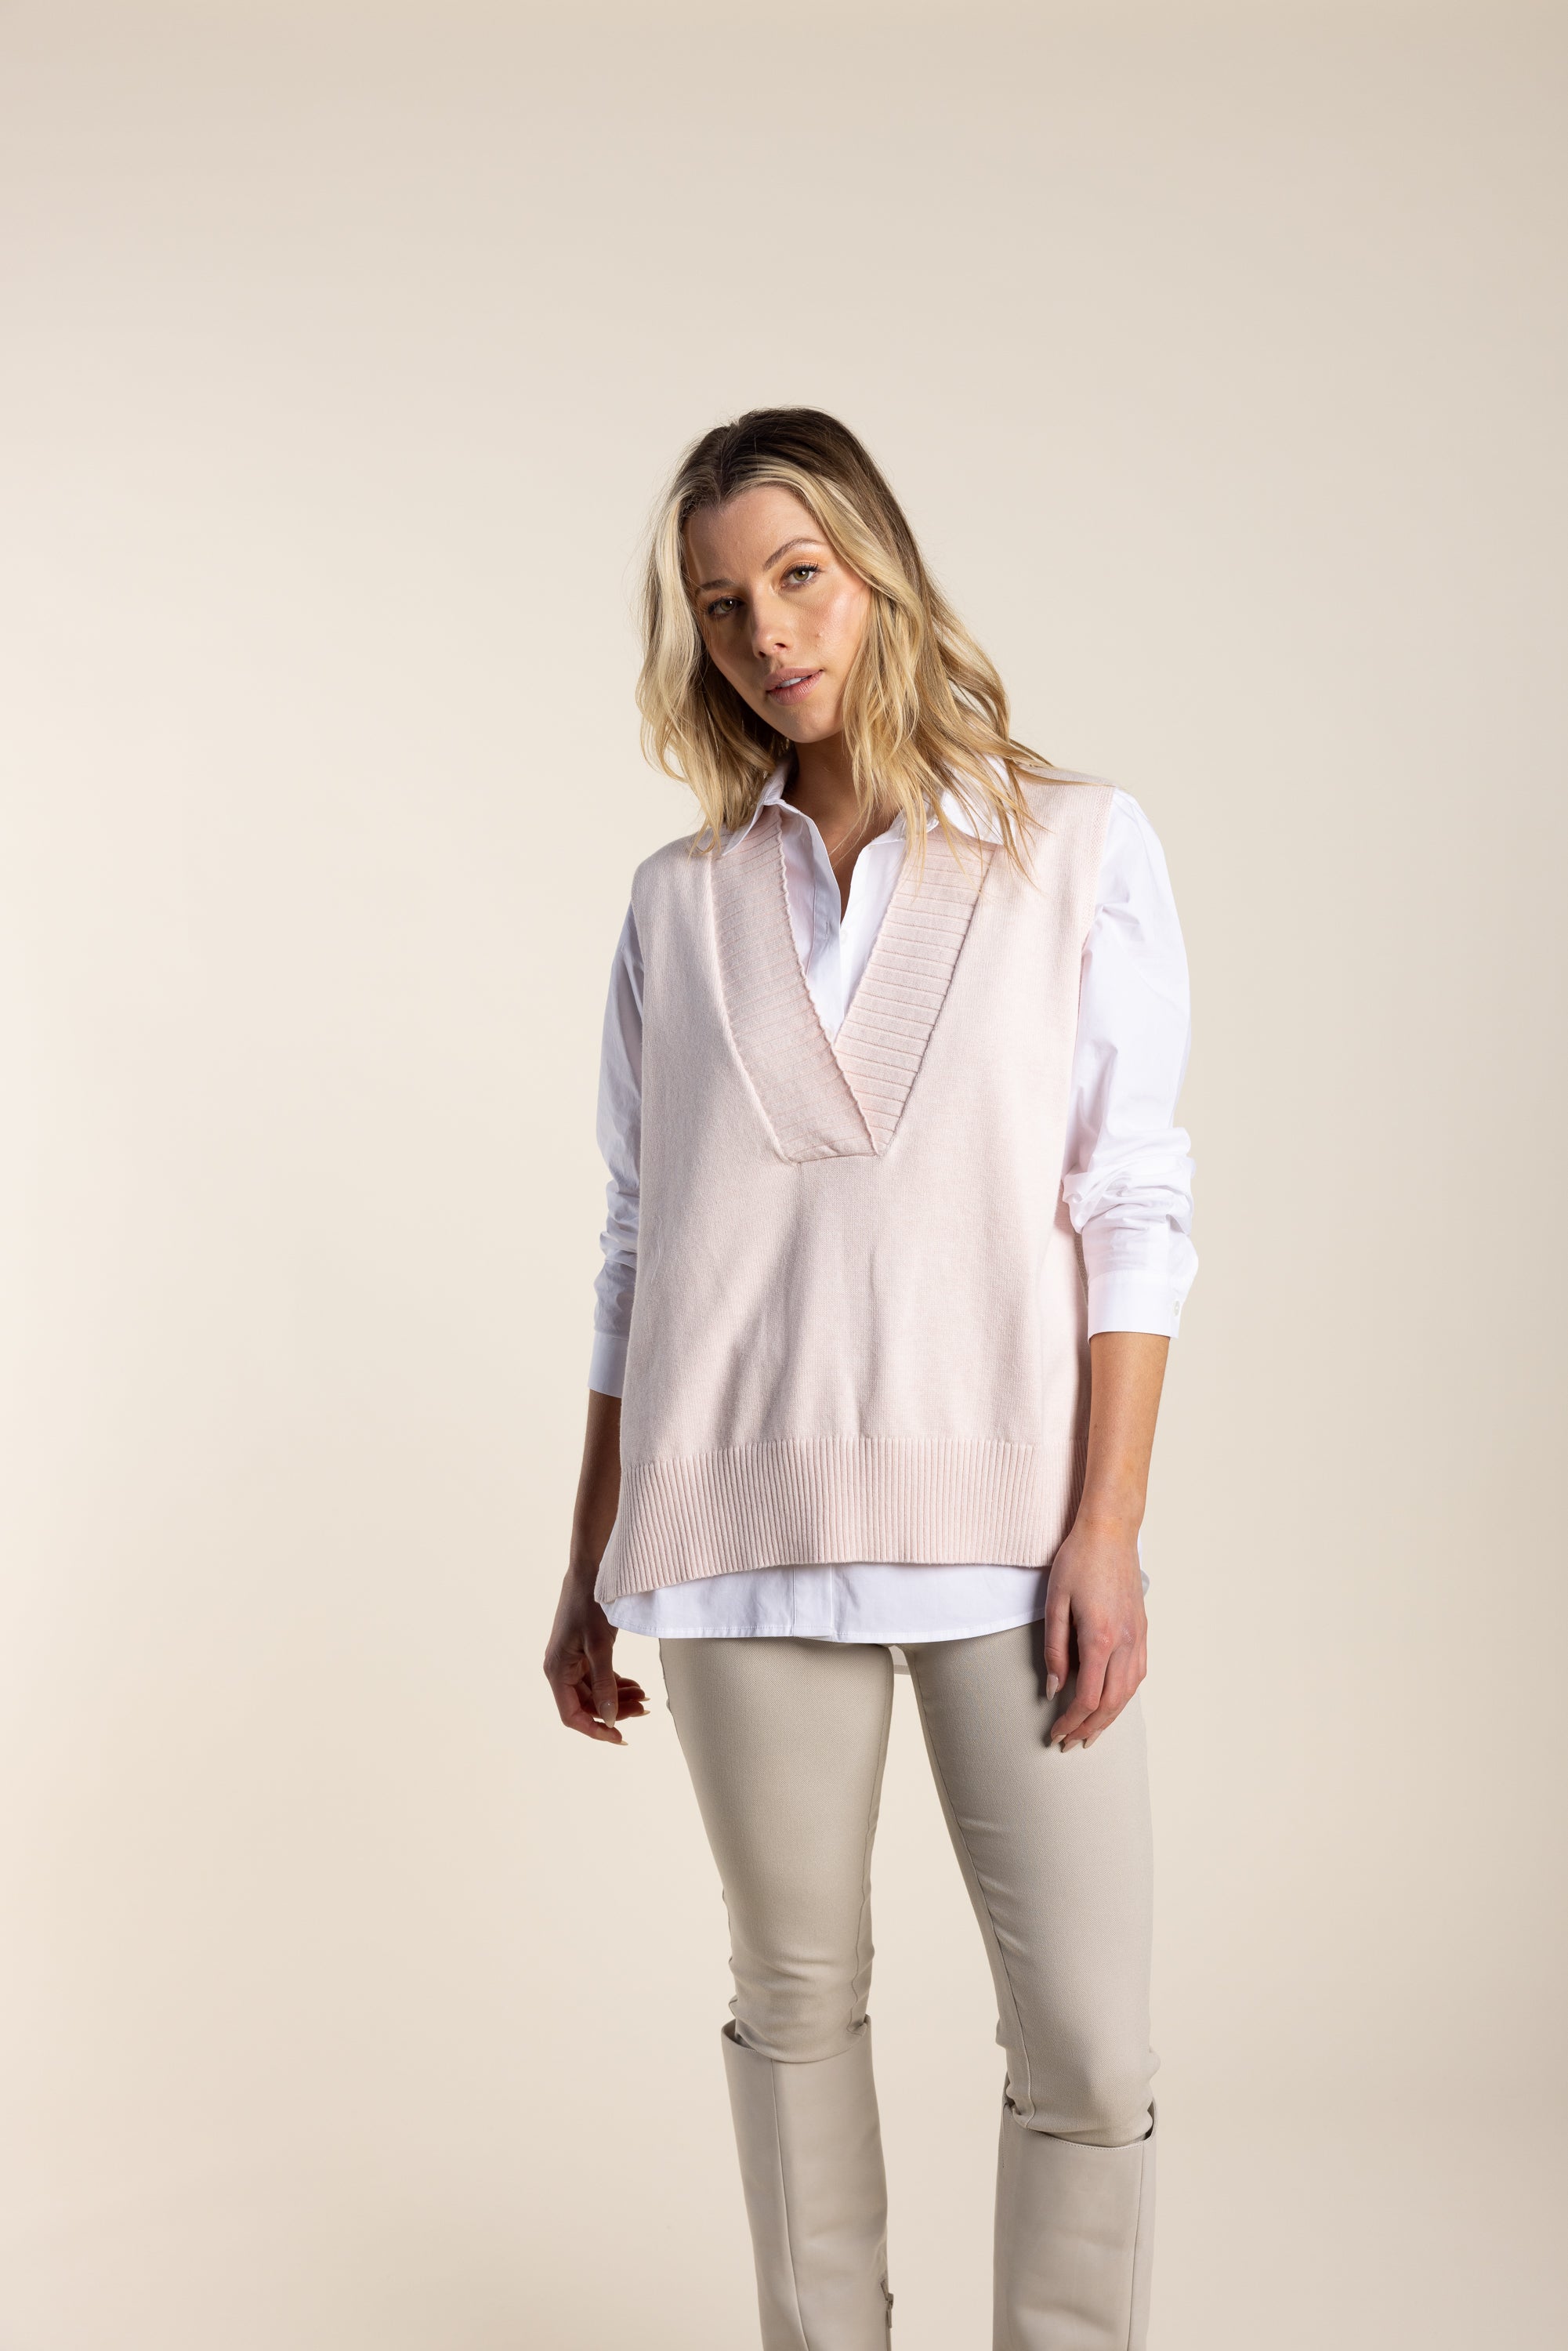 Two T's V Neck Vest with side Buttons - Pale Pink